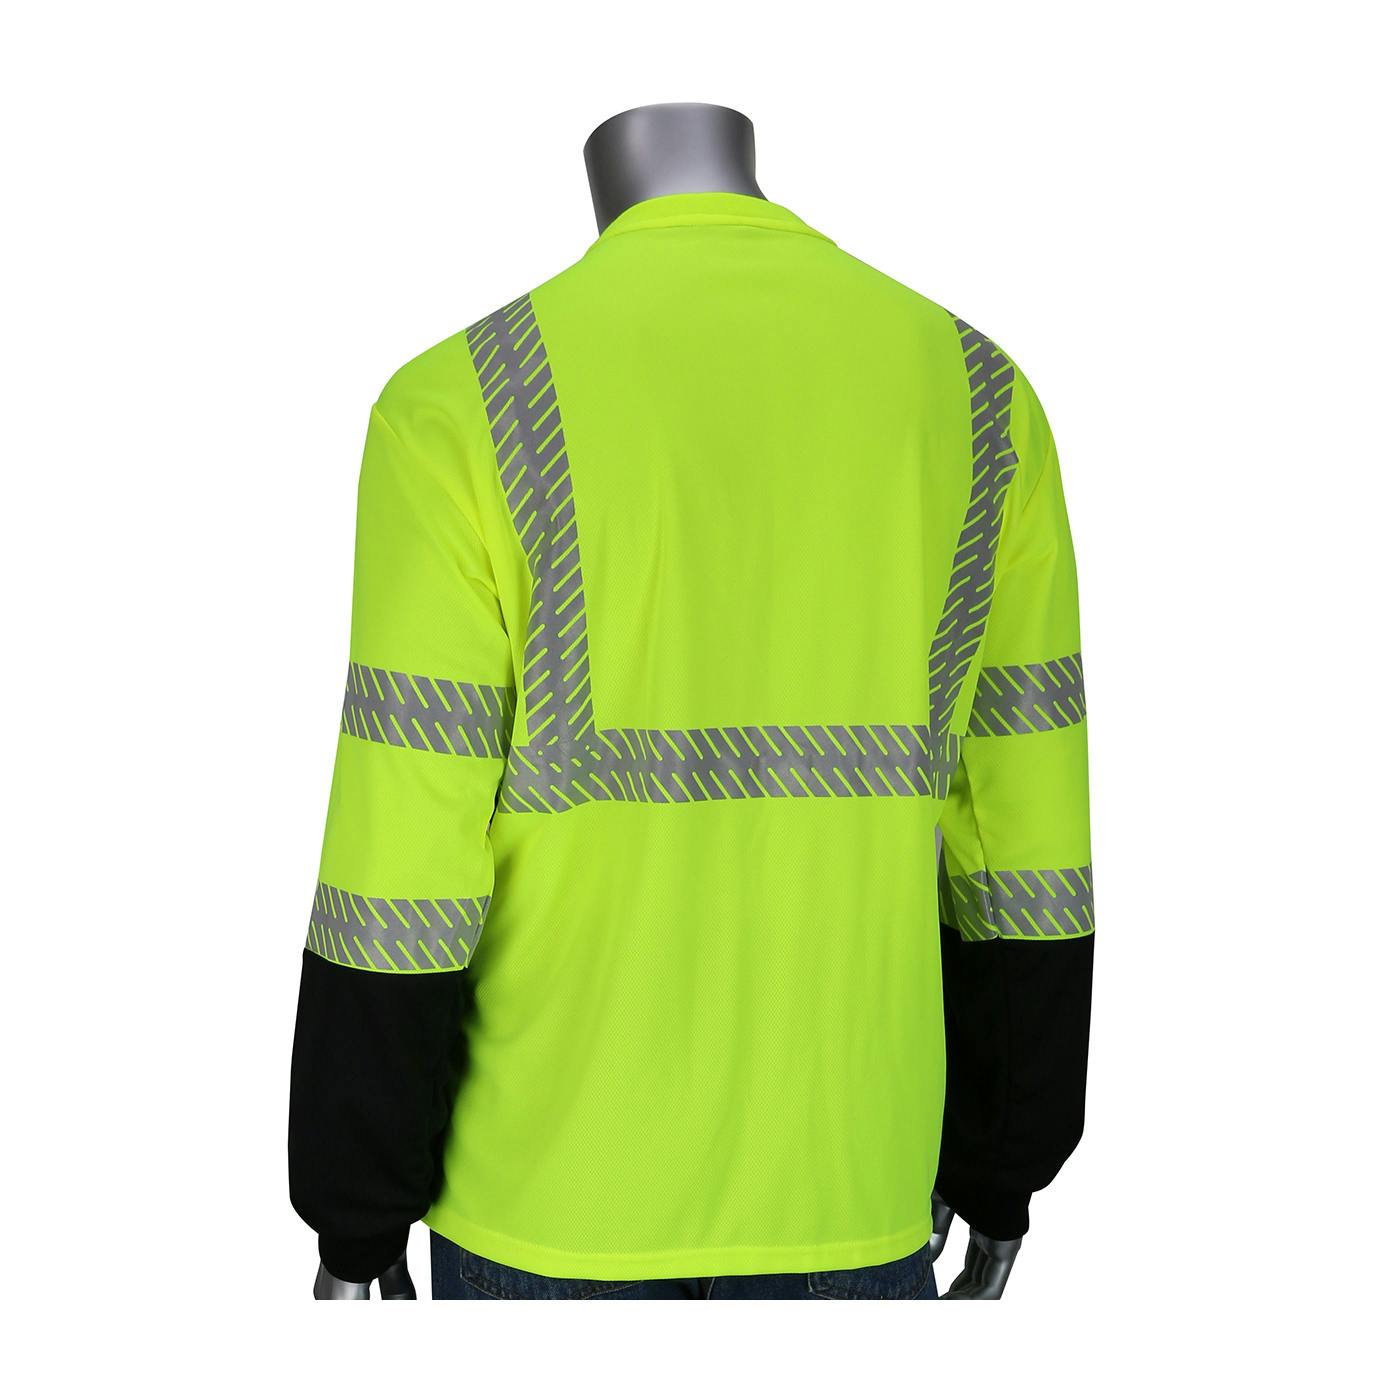 ANSI Type R Class 3 Long Sleeve T-Shirt with 50+ UPF Sun Protection, Built-in Insect Repellent and Black Bottom Front, Hi-Vis Yellow (313-1375B)